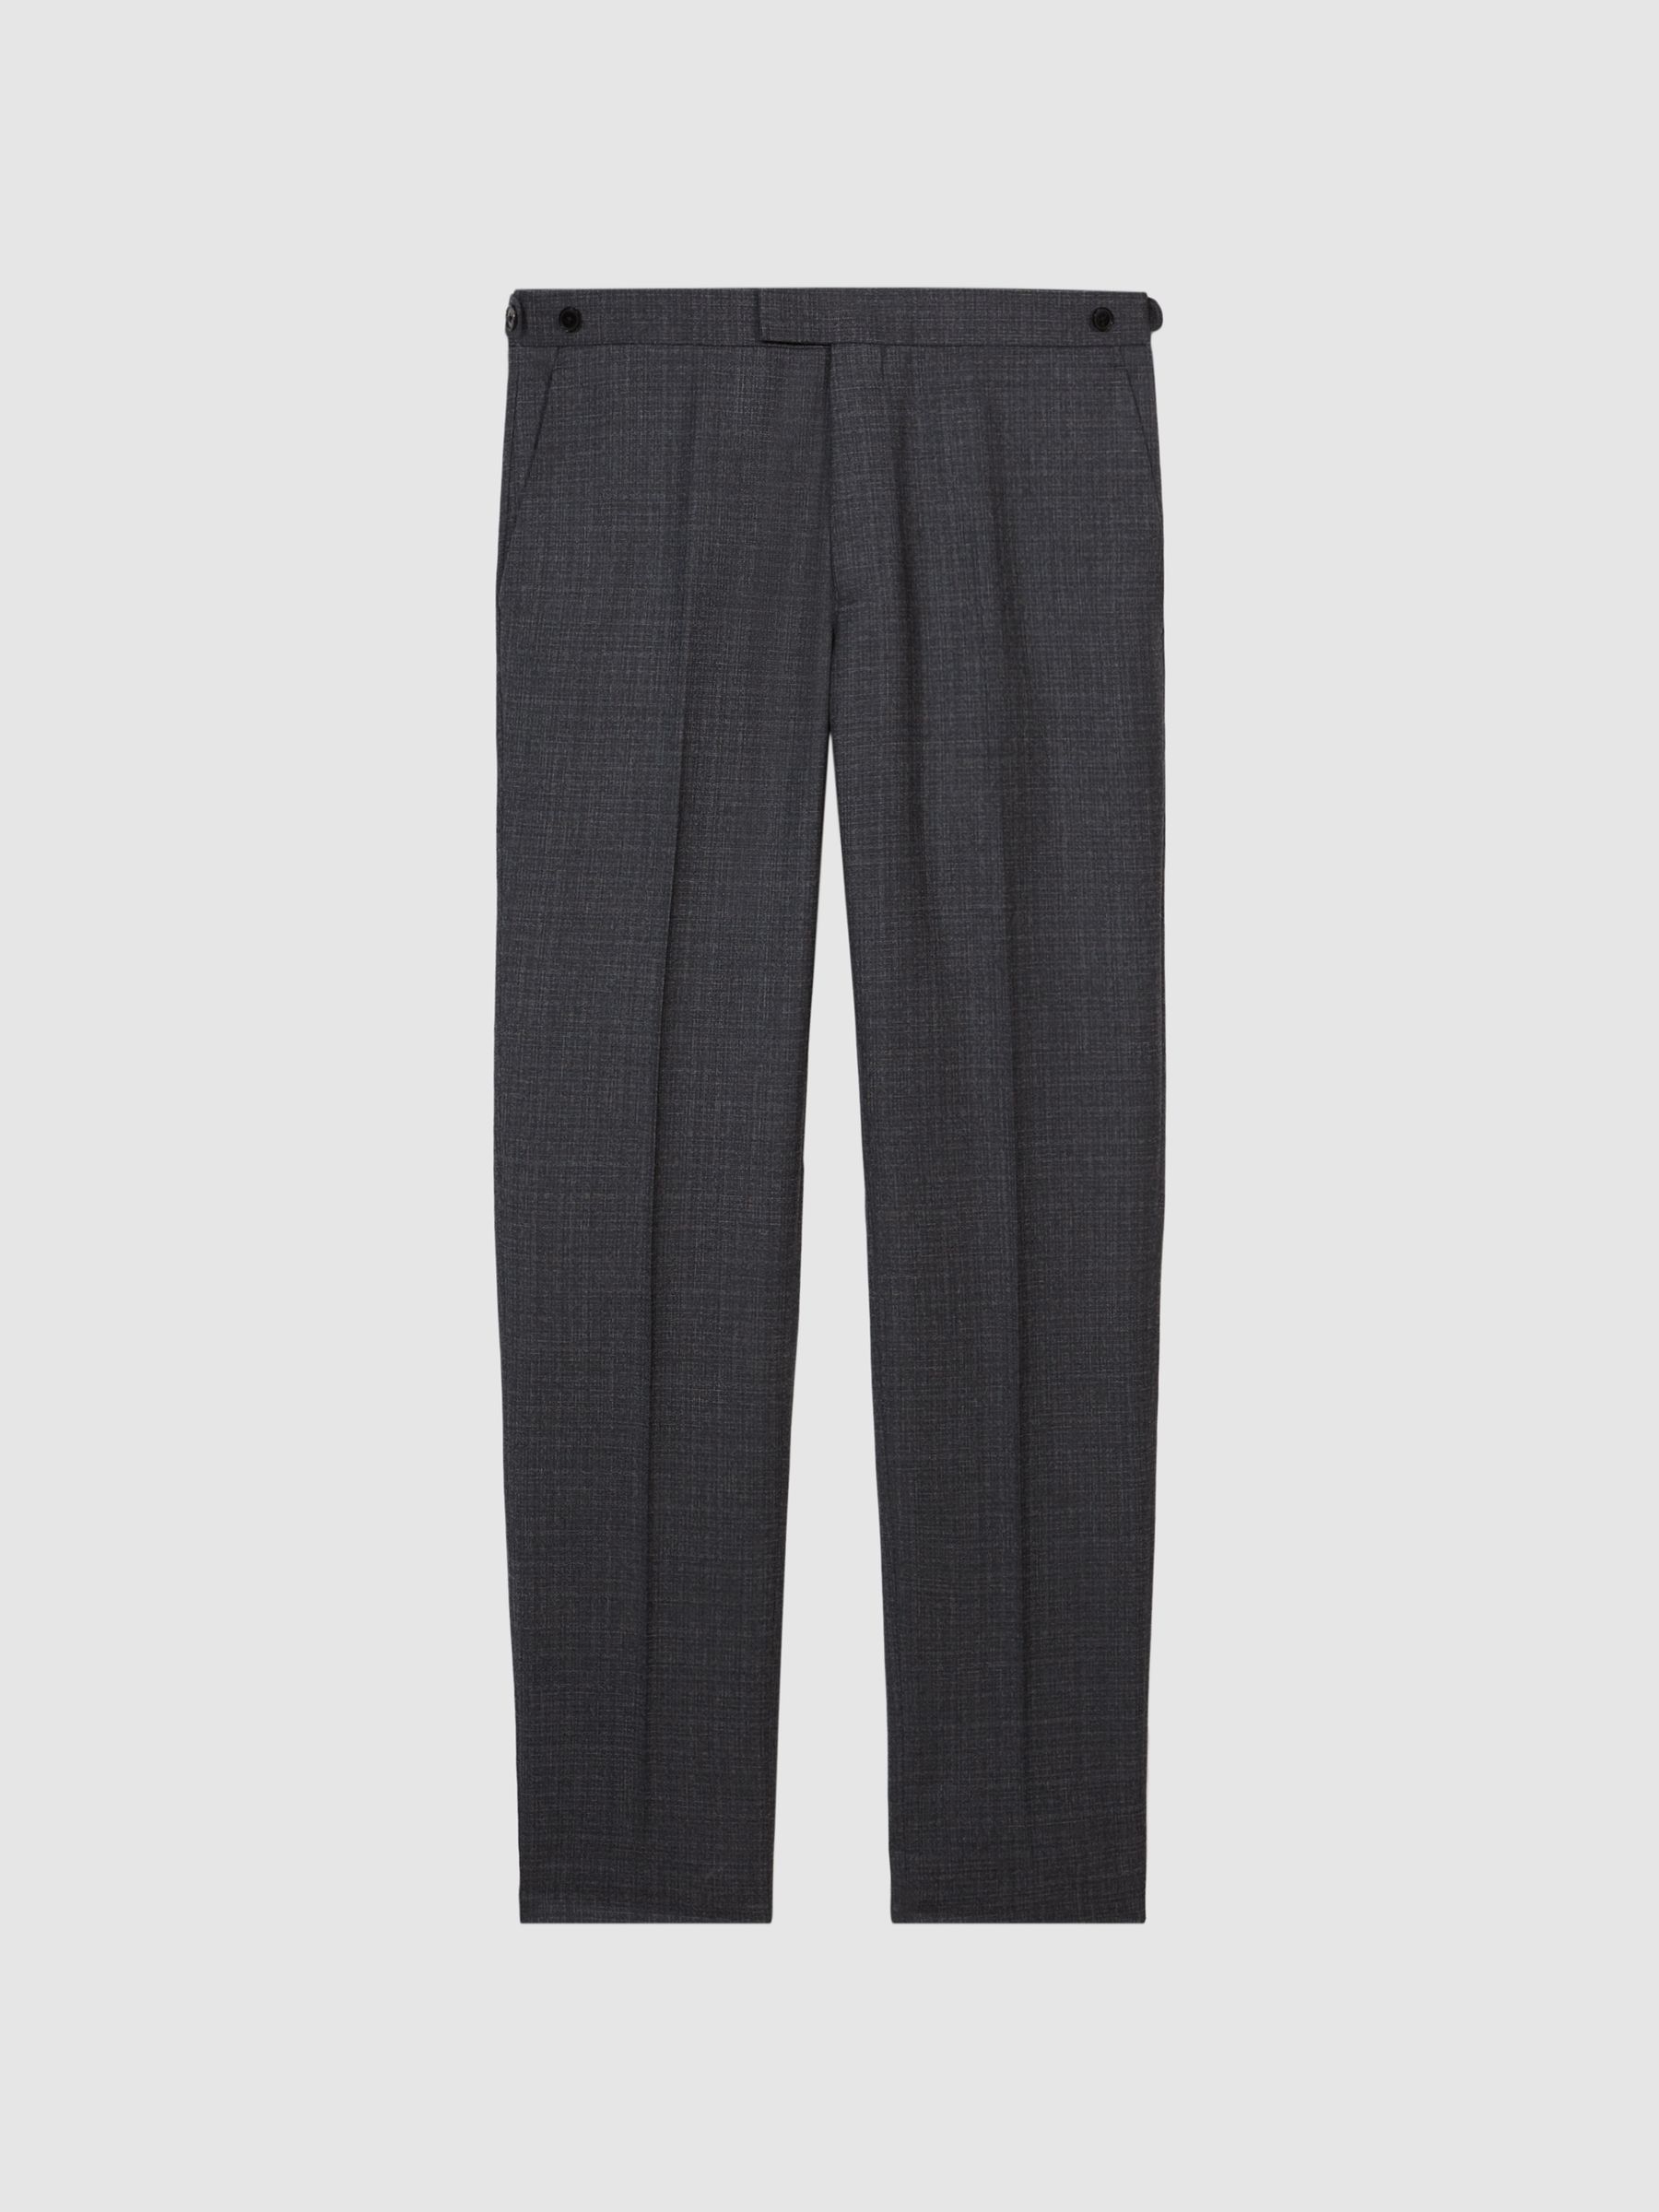 Textured Slim Fit Trousers in Charcoal - REISS